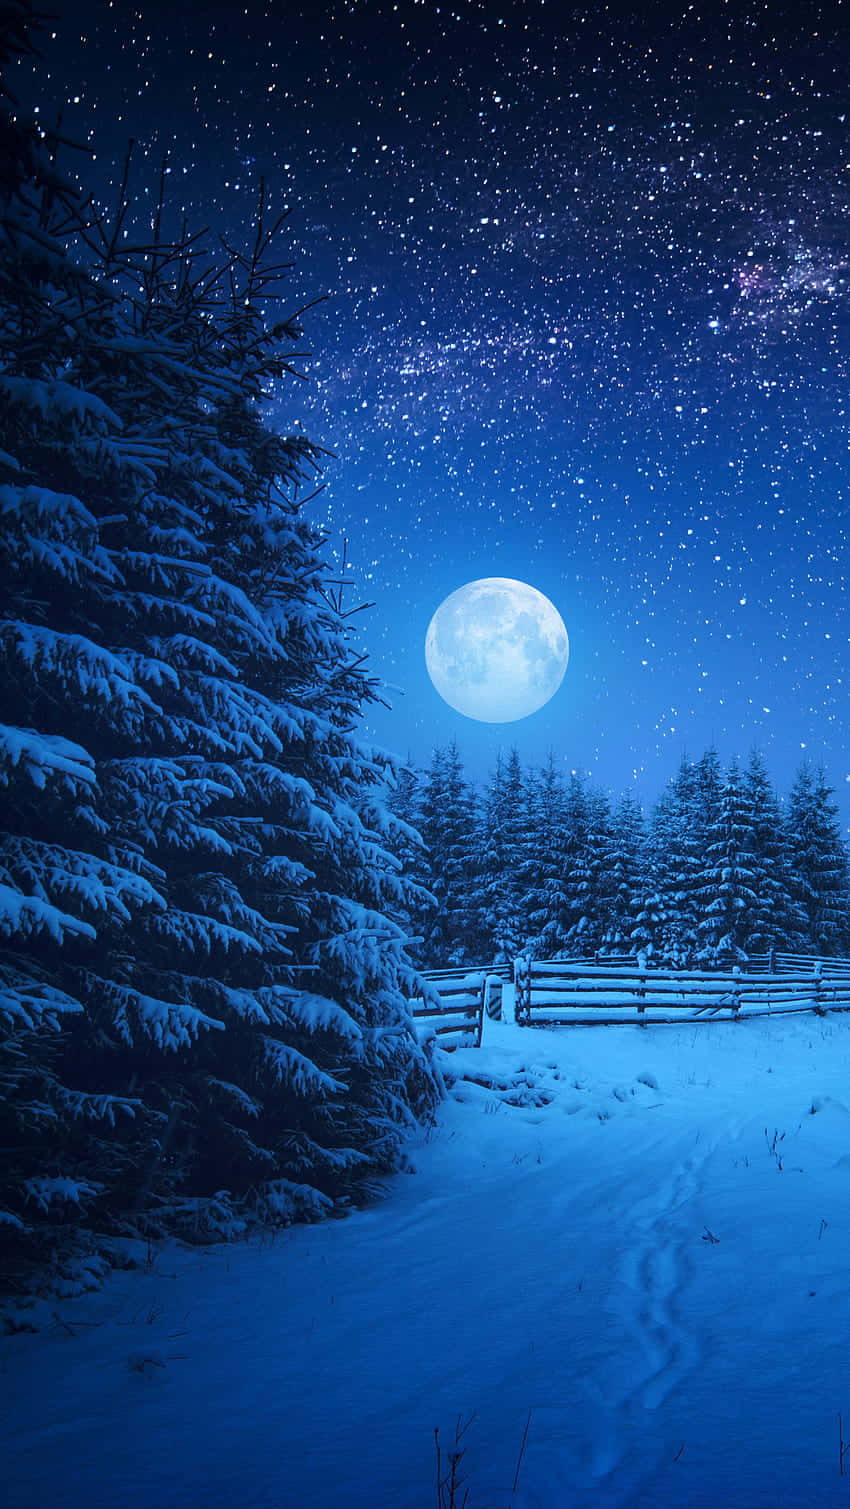 A Nighttime Scene with a Full Moon in all its Awe-inspiring Glory Wallpaper